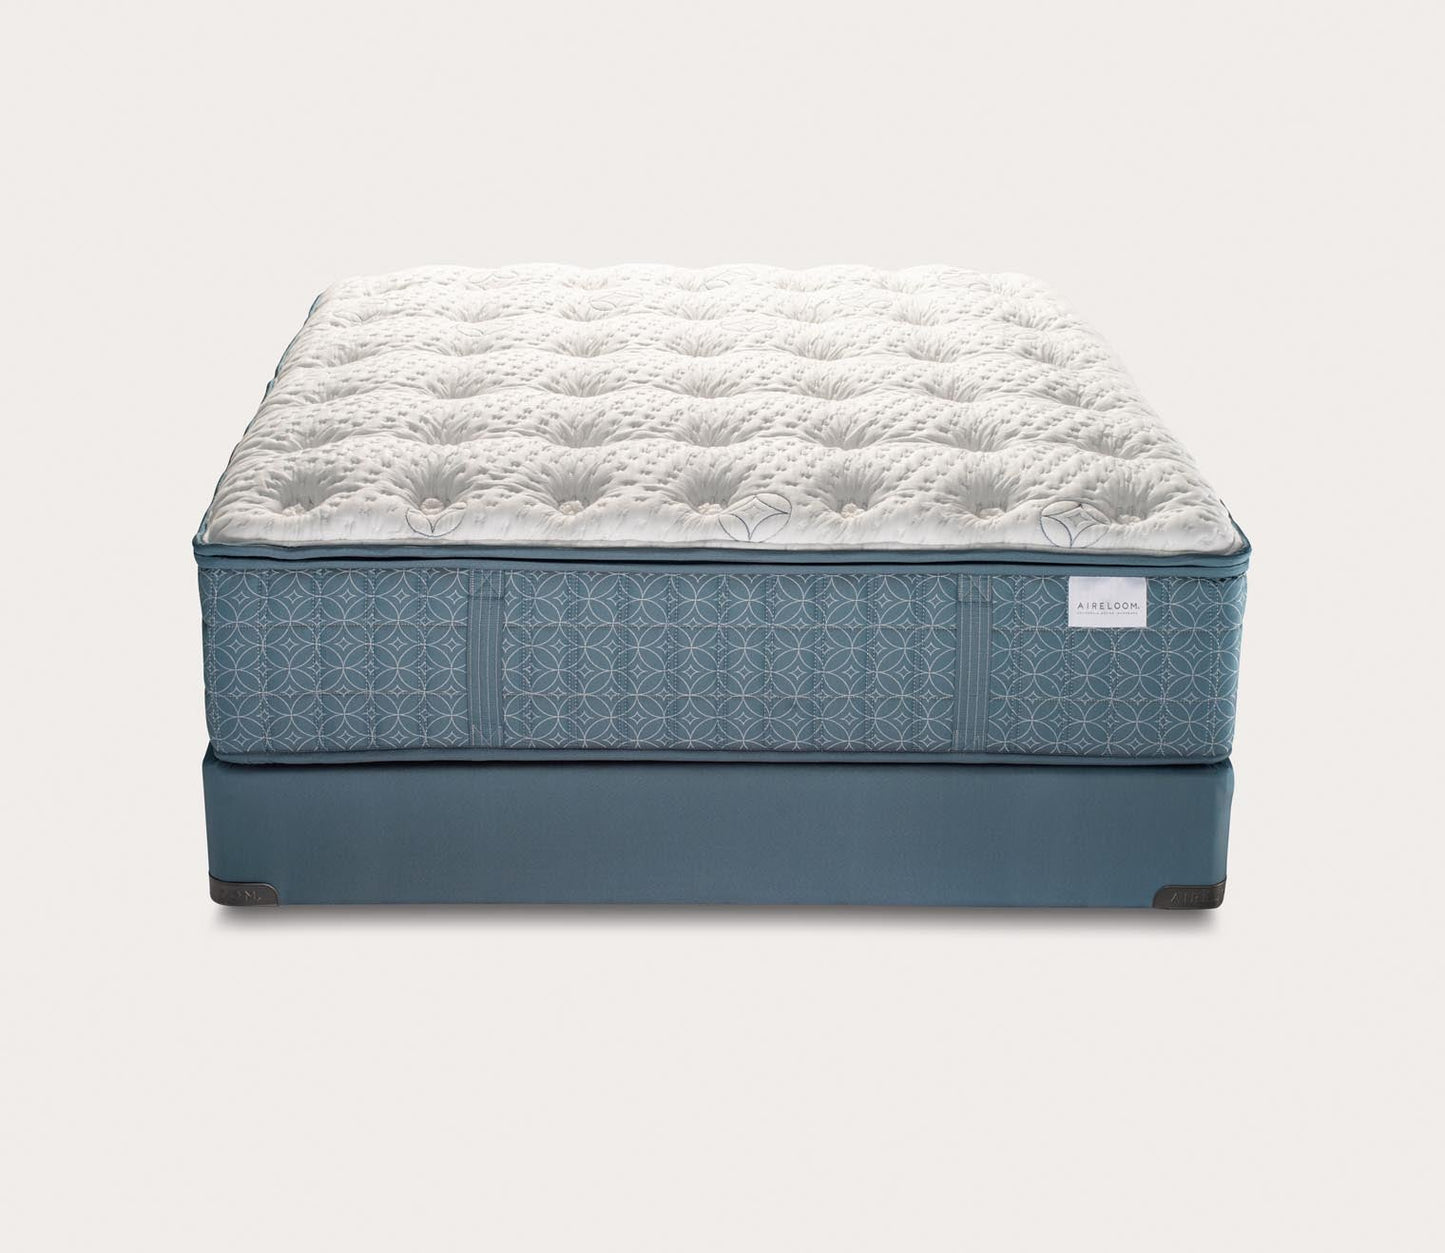 Luxetop M1 Firm Mattress by Aireloom